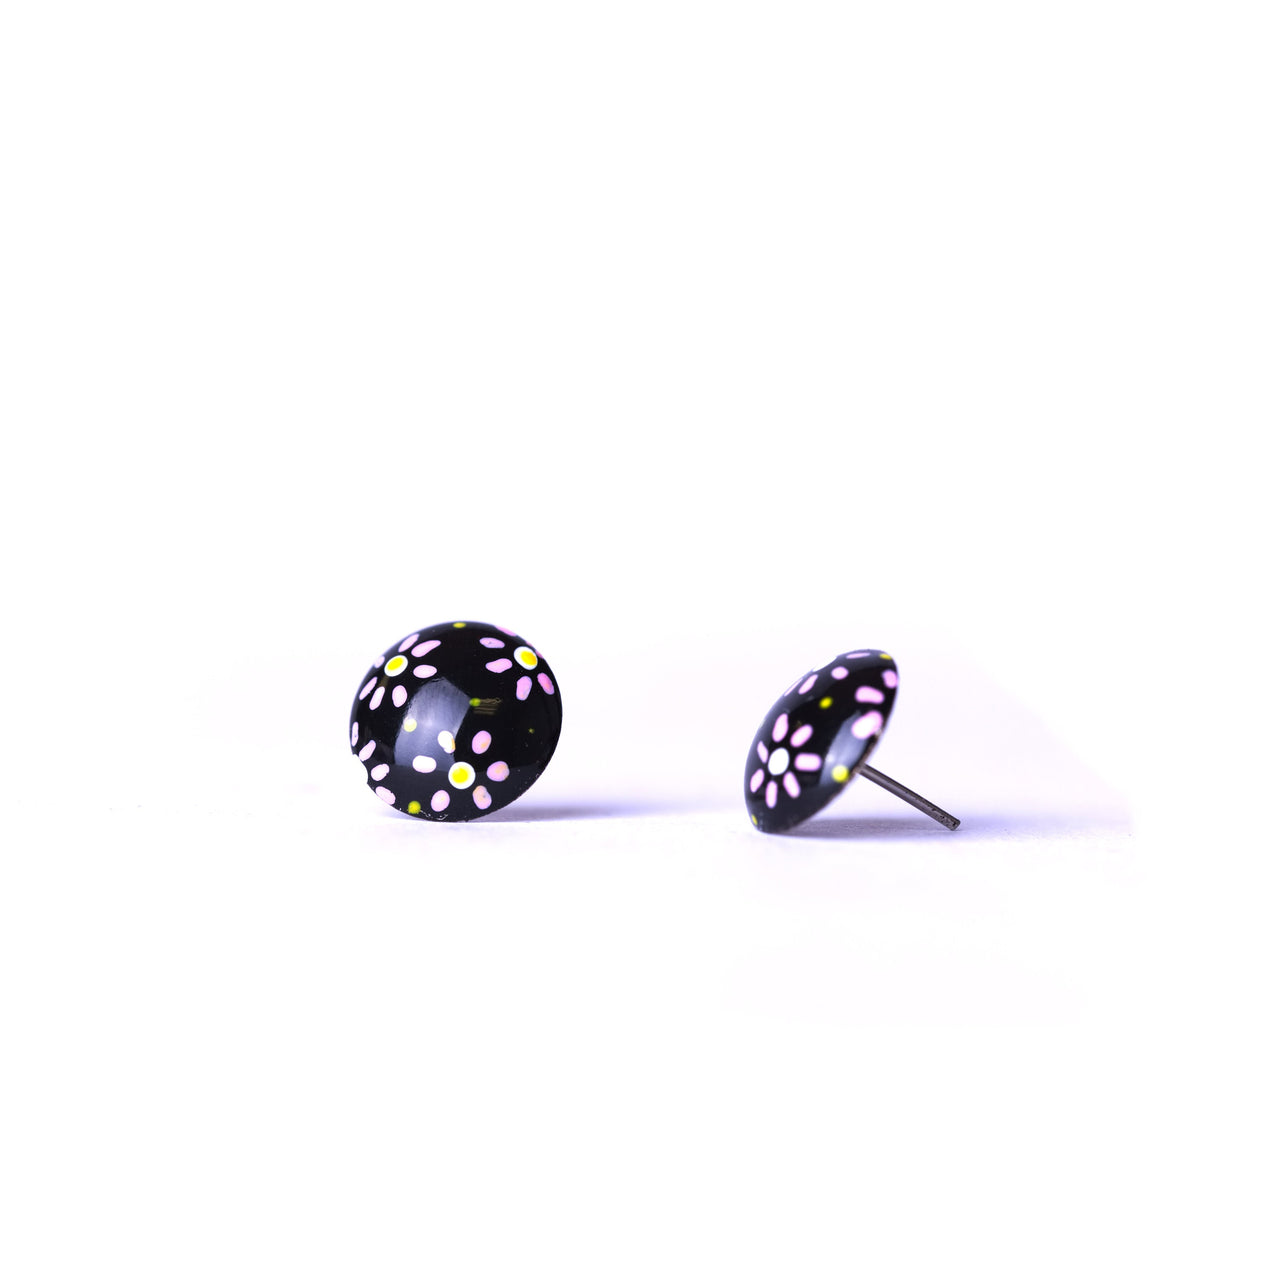 Hammered Black Dome Earrings